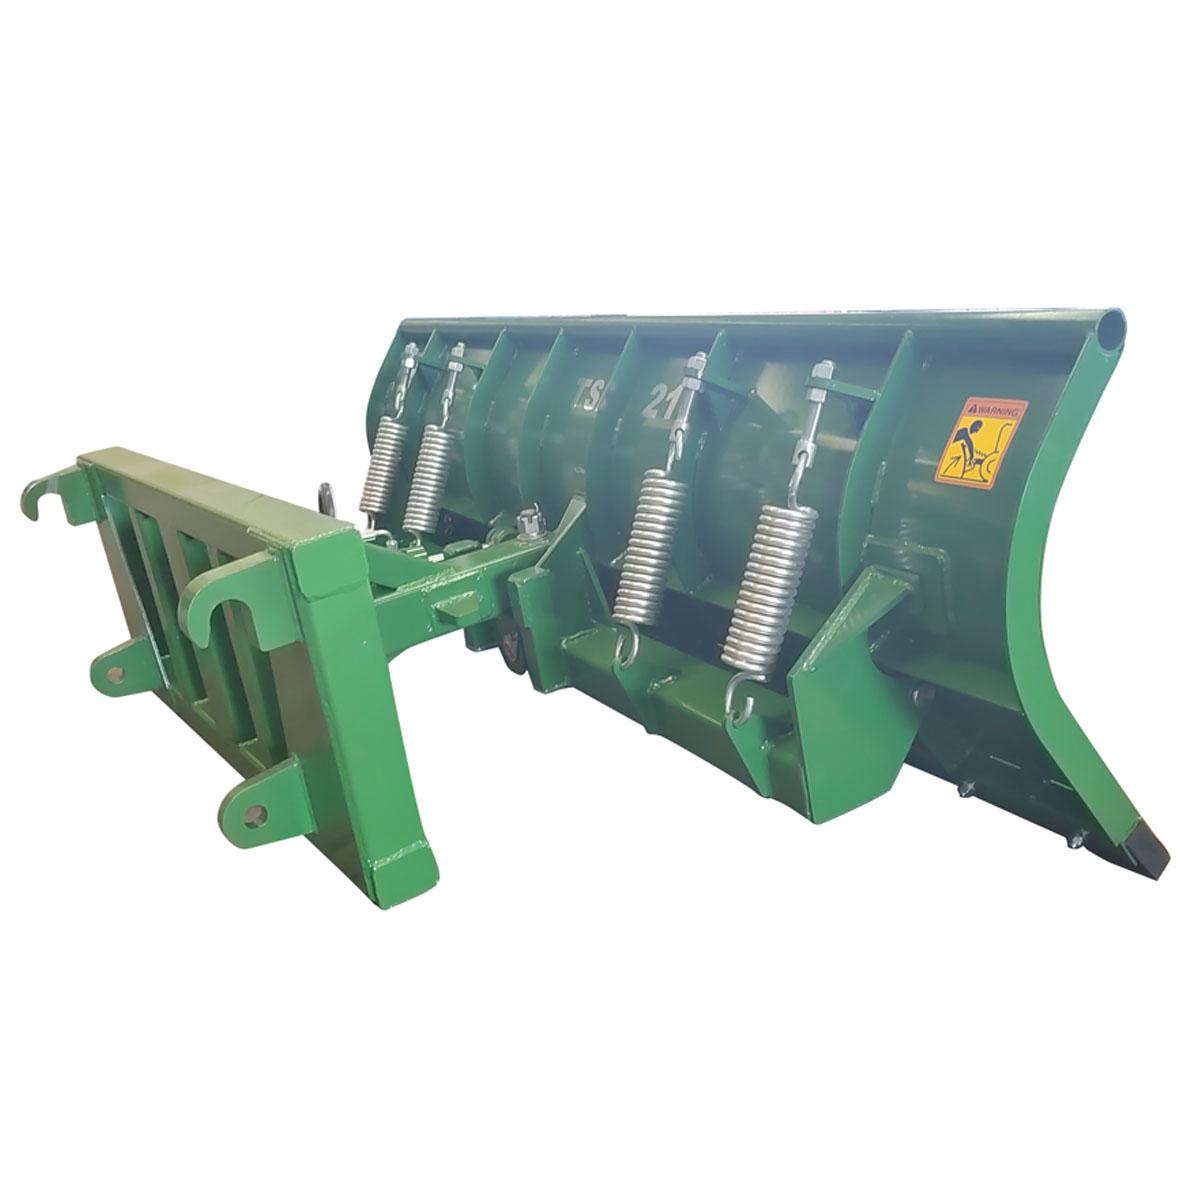 Value Industrial 7 Foot Tractor Snow Blade - hydraulic controls - 26 degree angle